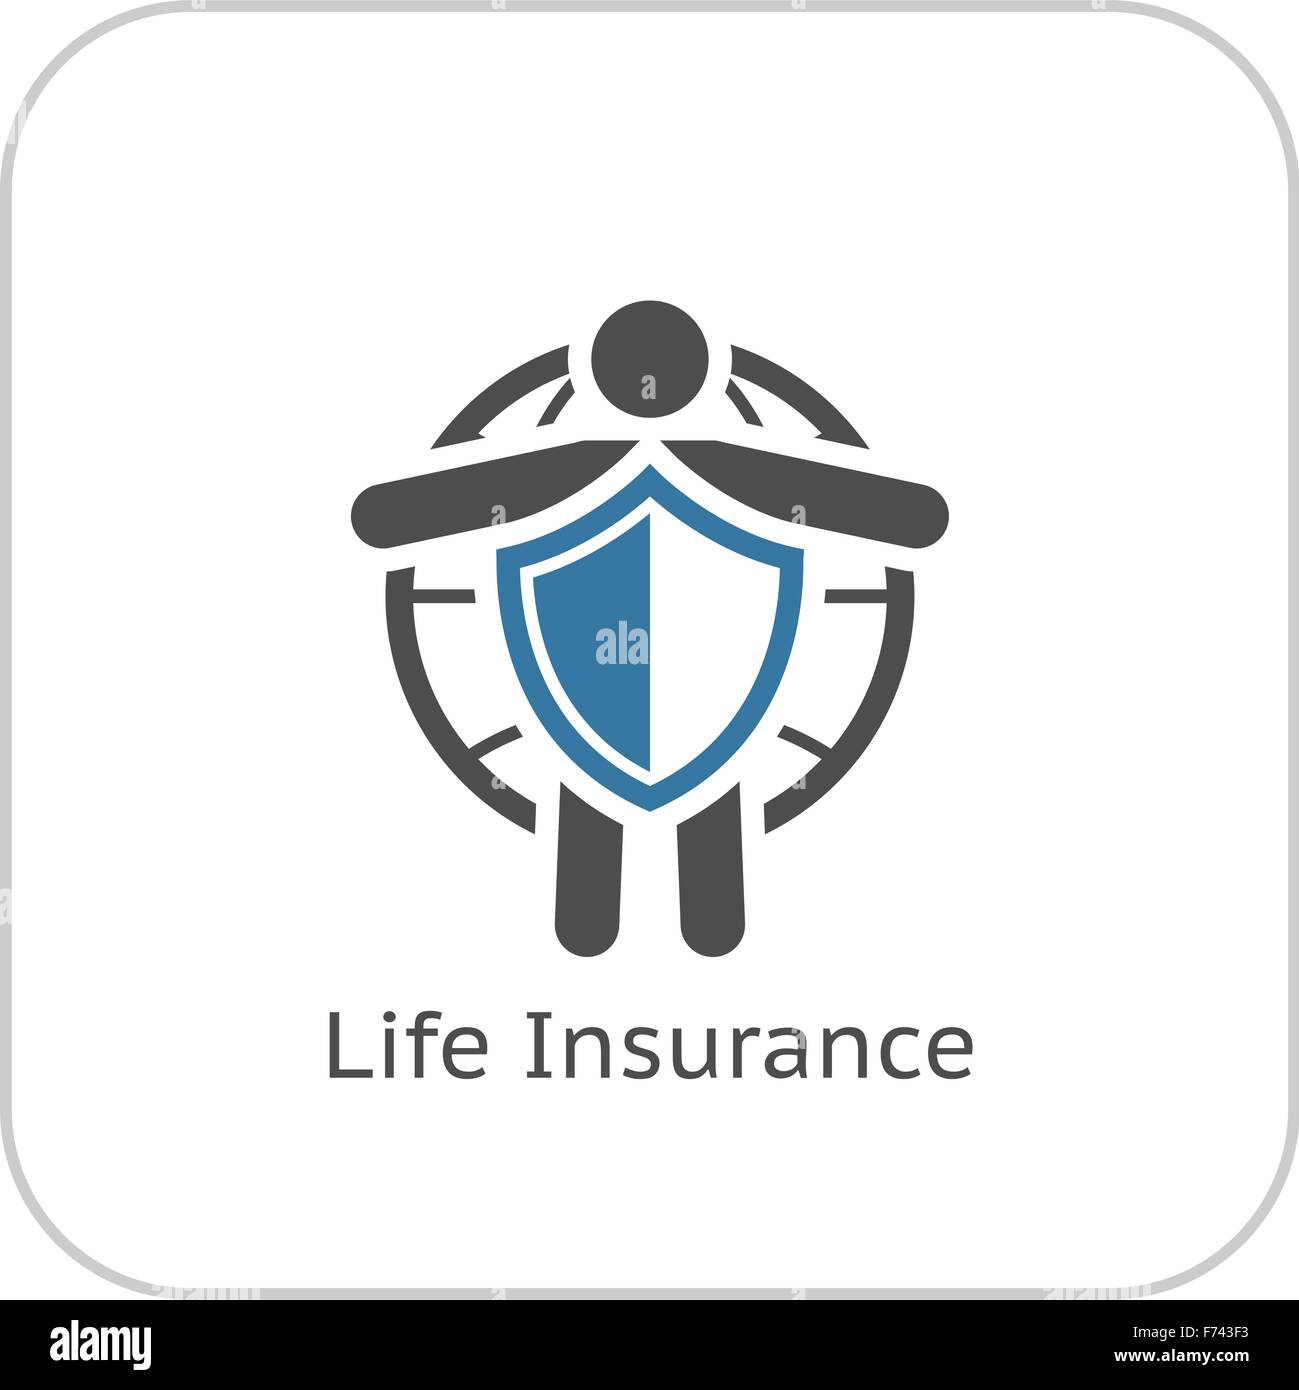 Life Insurance and Medical Services Icon. Flat Design. Stock Vector